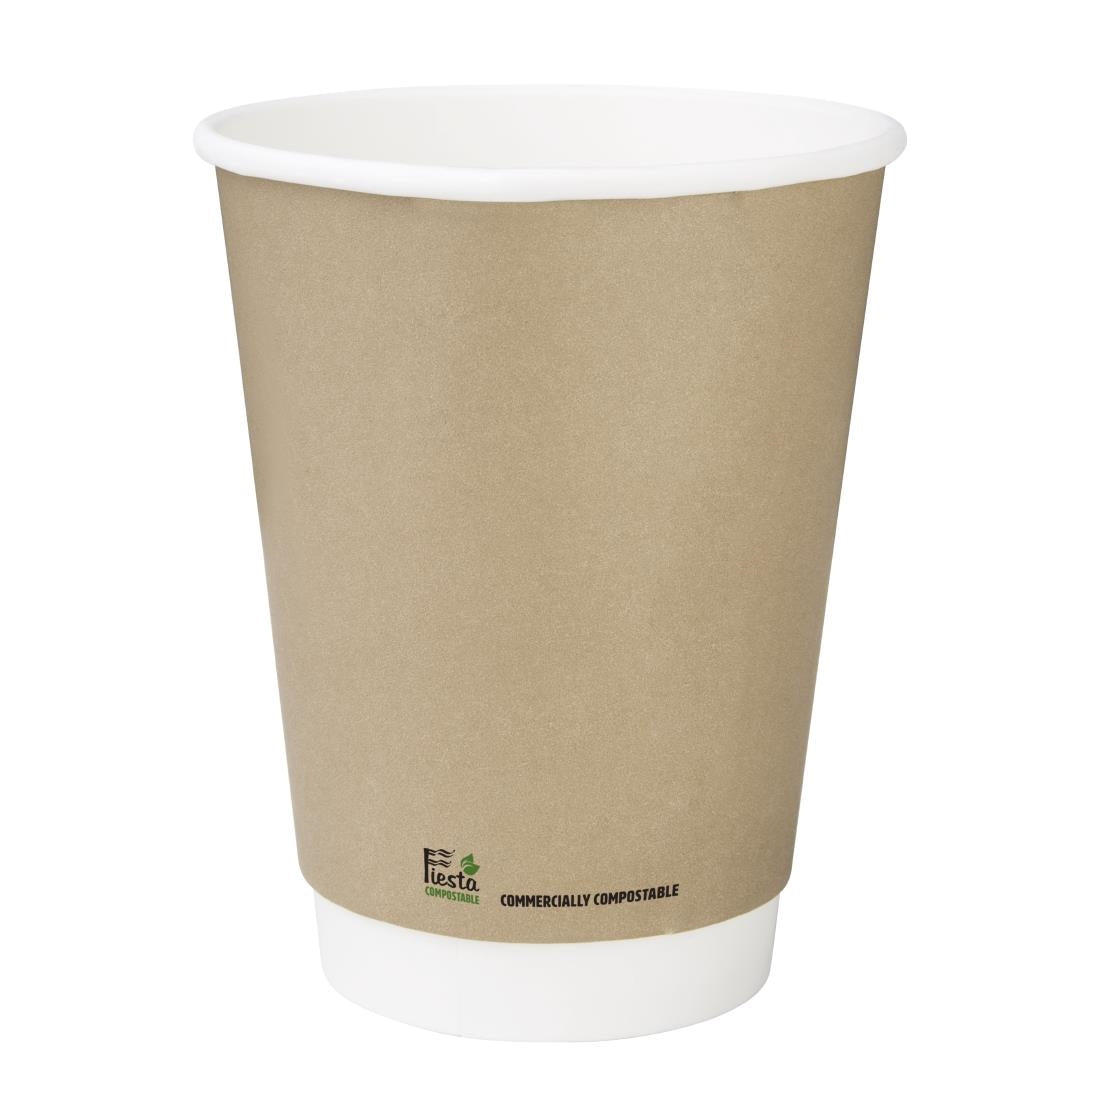 CU987 Fiesta Compostable Coffee Cups Double Wall 340ml (Pack of 25)